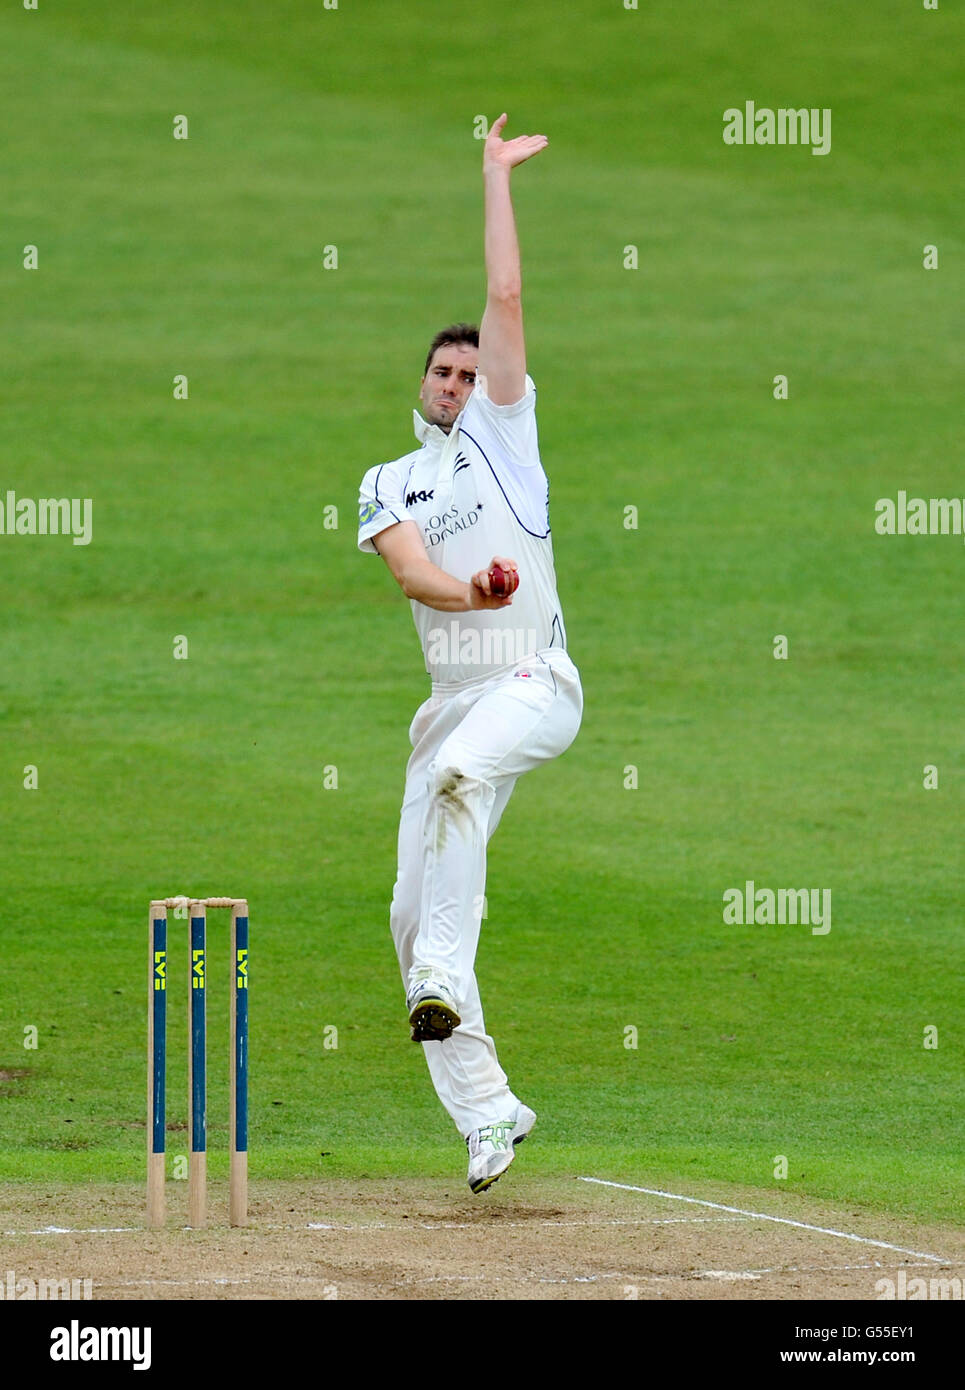 Cricket - LV= County Championship - Division One - Nottinghamshire v Middlesex - Day Two - Trent Bridge. Middlesex's Tim Murtagh bowls during the LV= County Championship, Division One match at Trent Bridge, Nottingham. Stock Photo